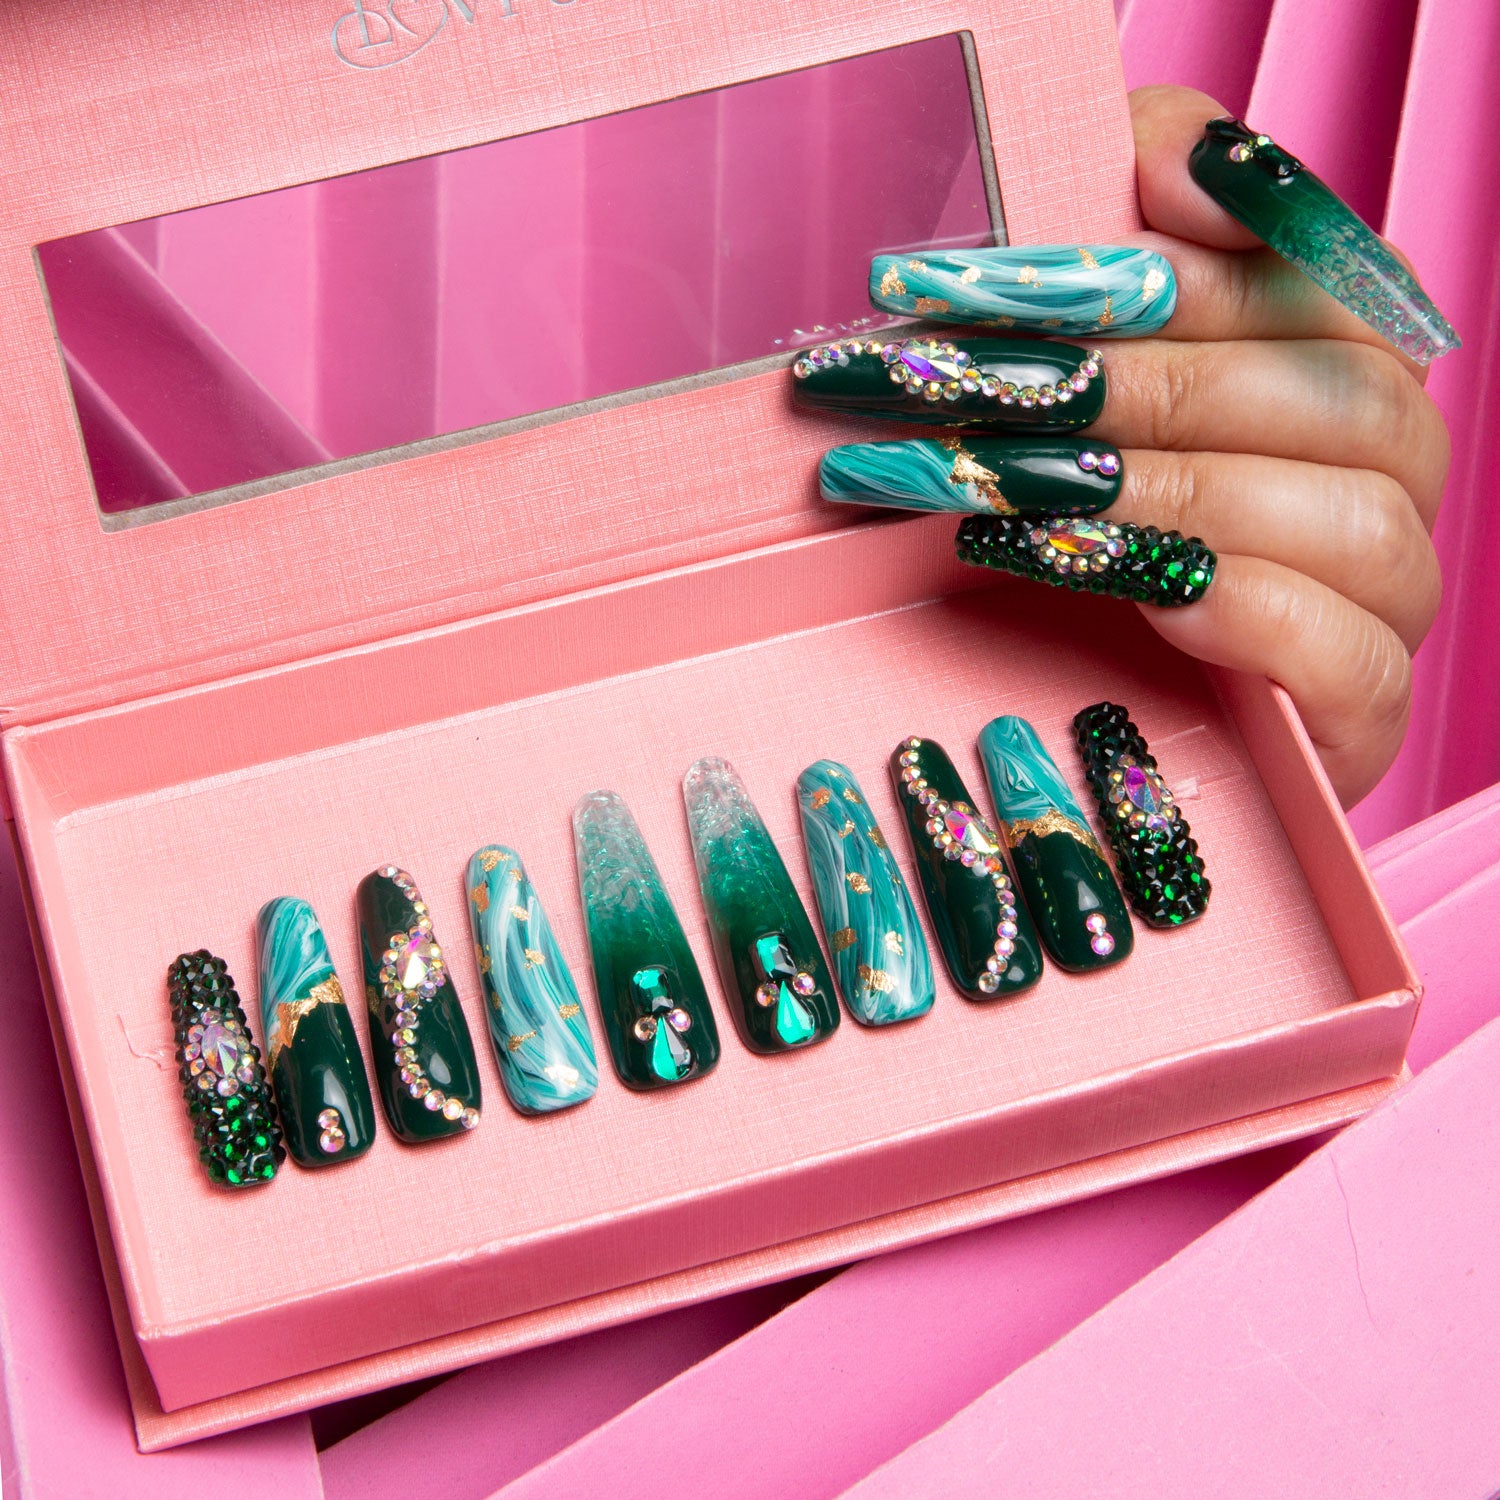 Lovful Emerald Envy press-on nails set in a pink box. Designs feature gradient green shades, gold decor, and a mesmerizing liquid flowing effect. A hand with applied nails is holding the box.